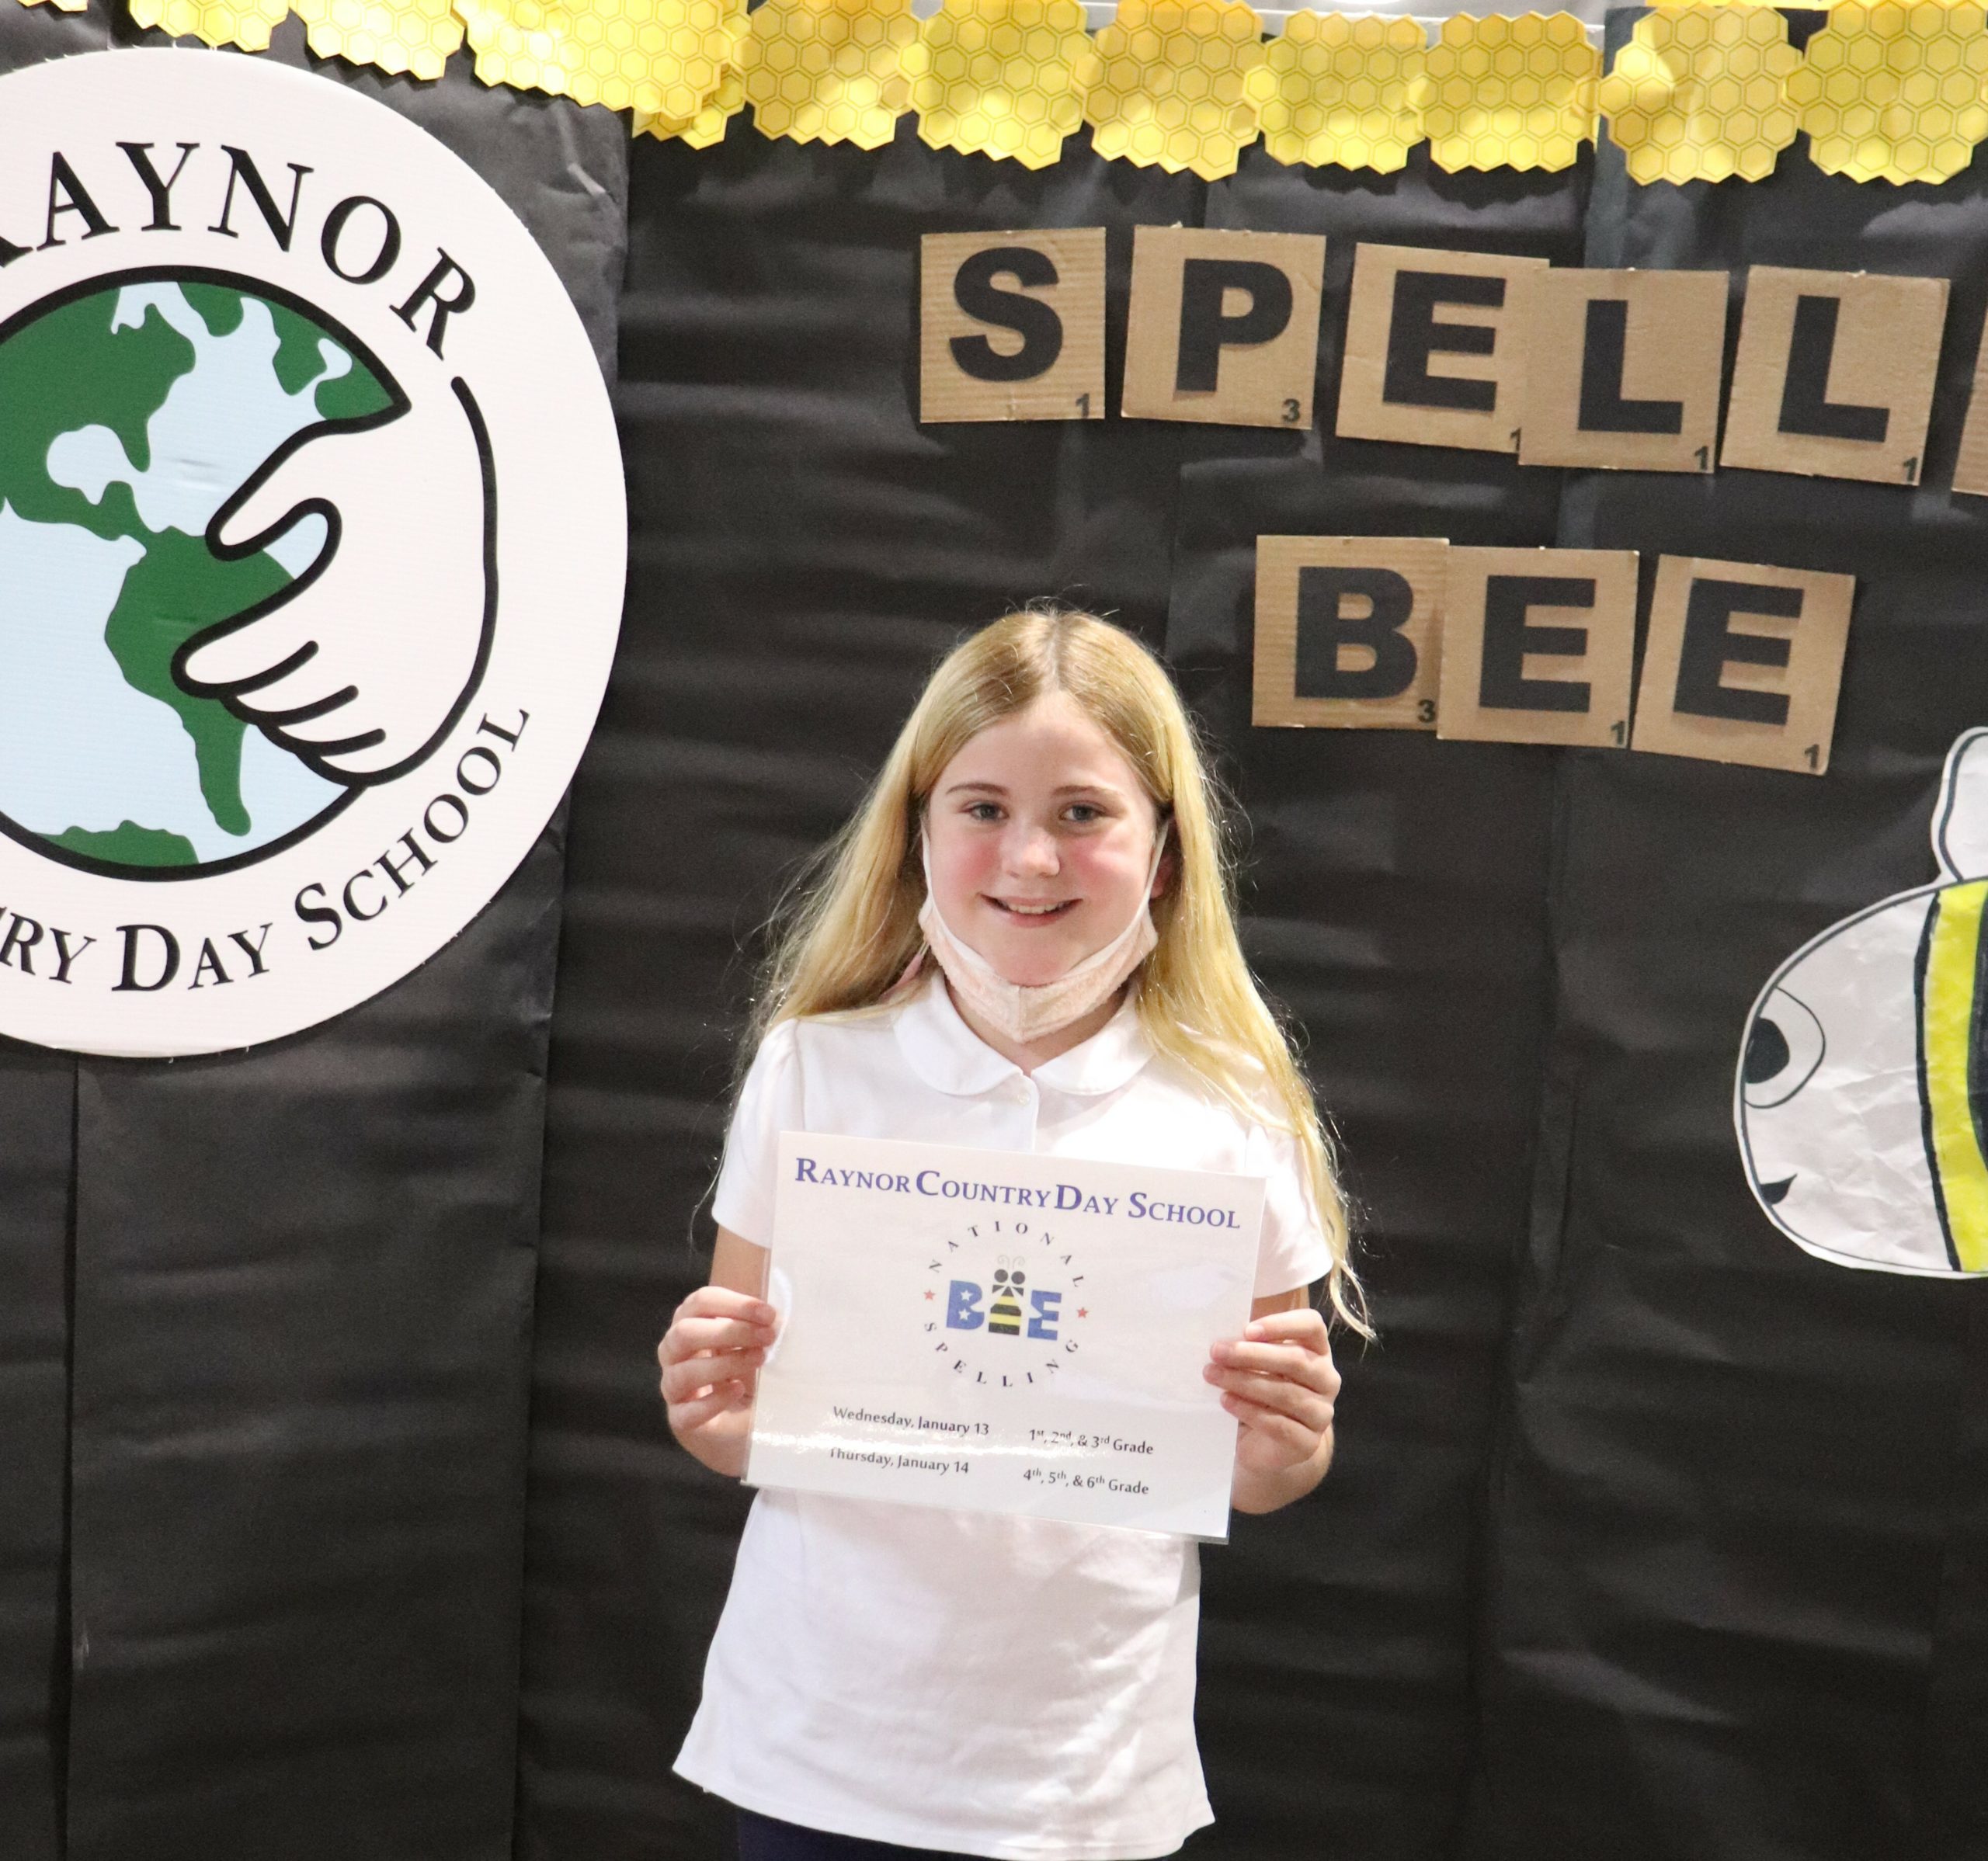 Fifth-grade student, Rebecca Bartha, was awarded first place during the Scripps' National Institute Spelling Bee held on the Raynor Country Day School Campus, in Speonk.